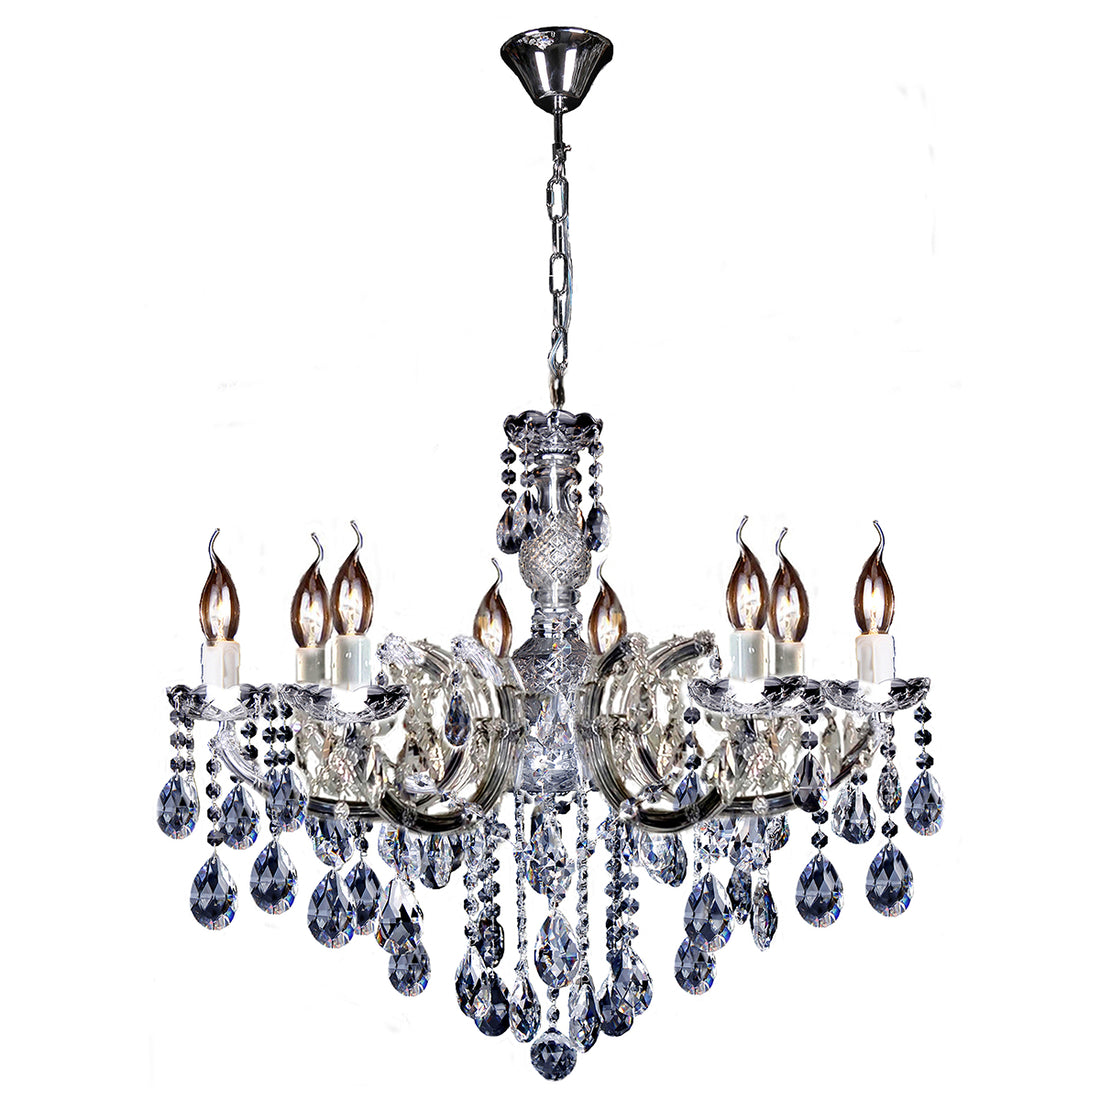 Zurich 8 Light Chrome Crystal Traditional Pendant Chandelier